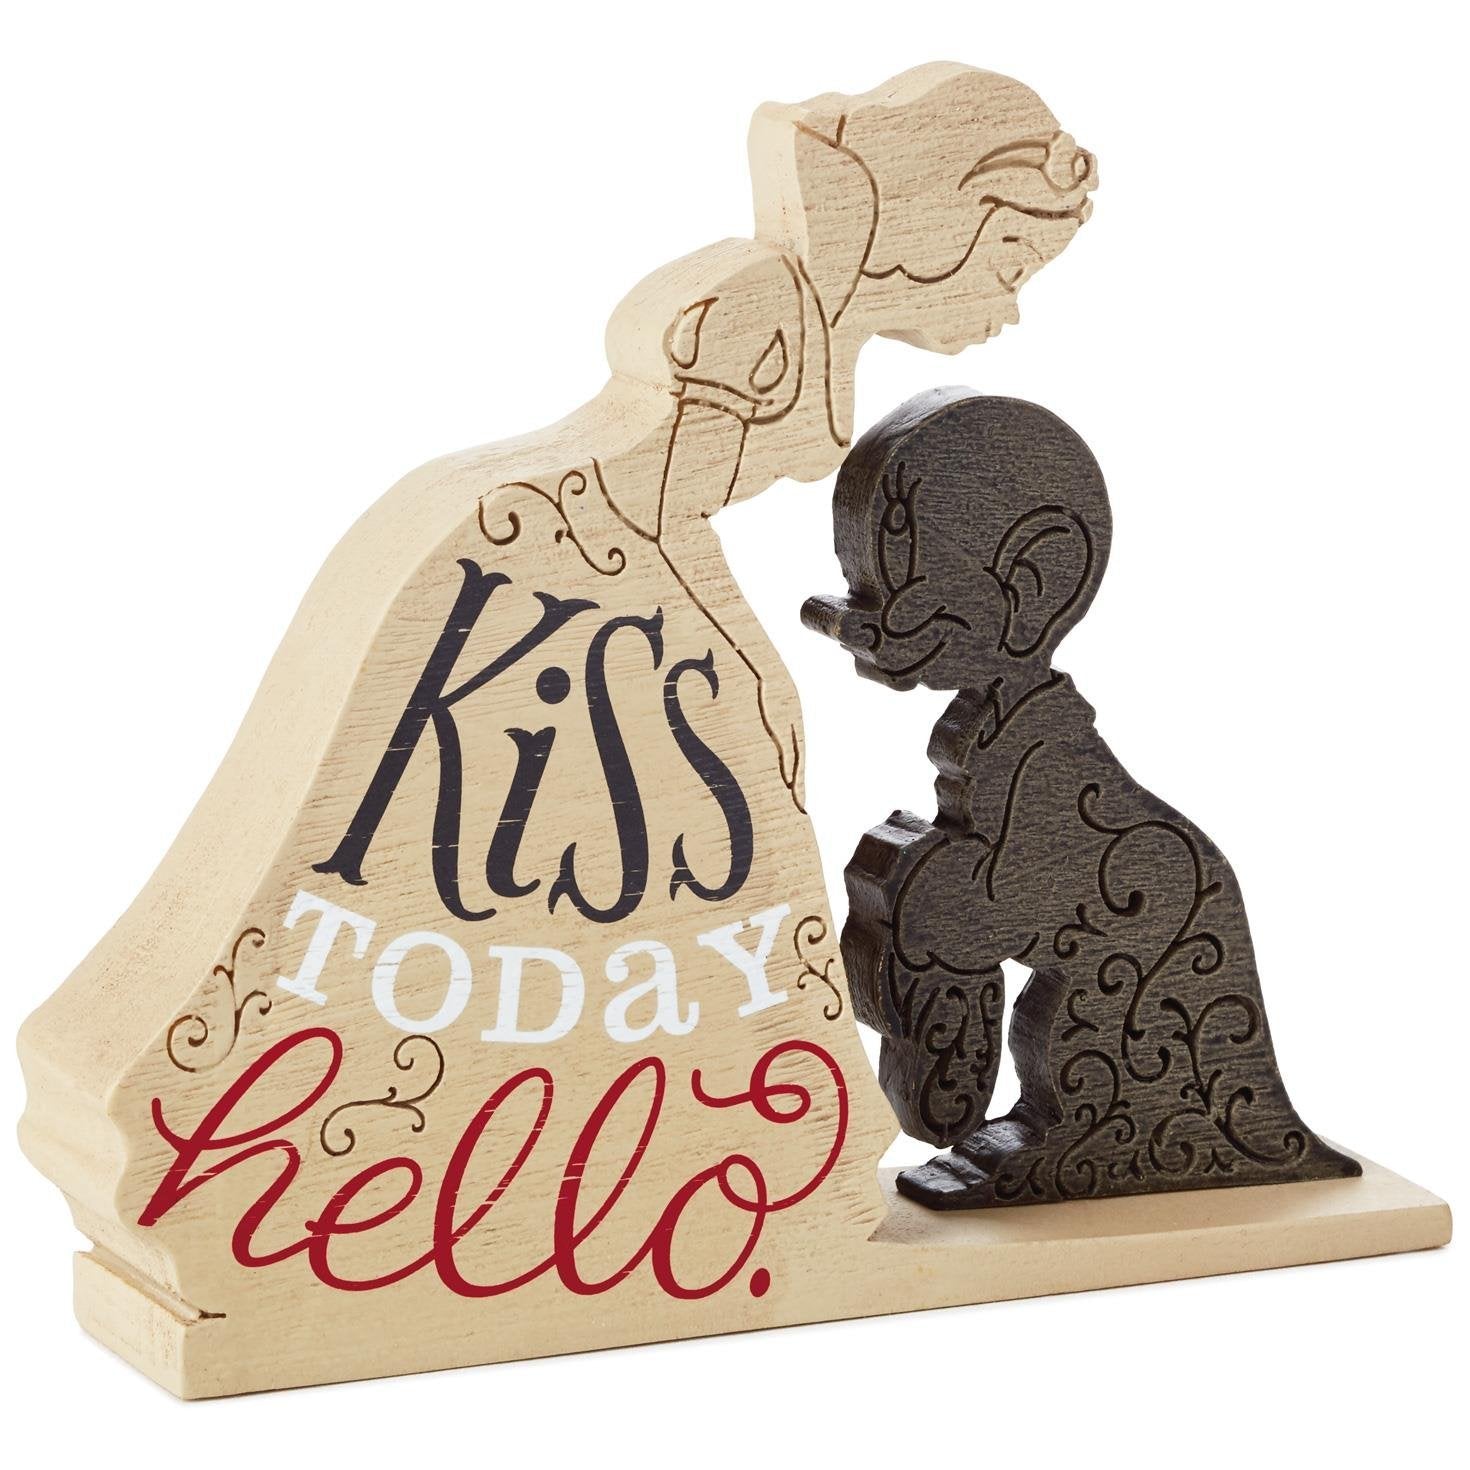 Disney "Kiss Today Hello" Snow White and Dopey Quote Sign